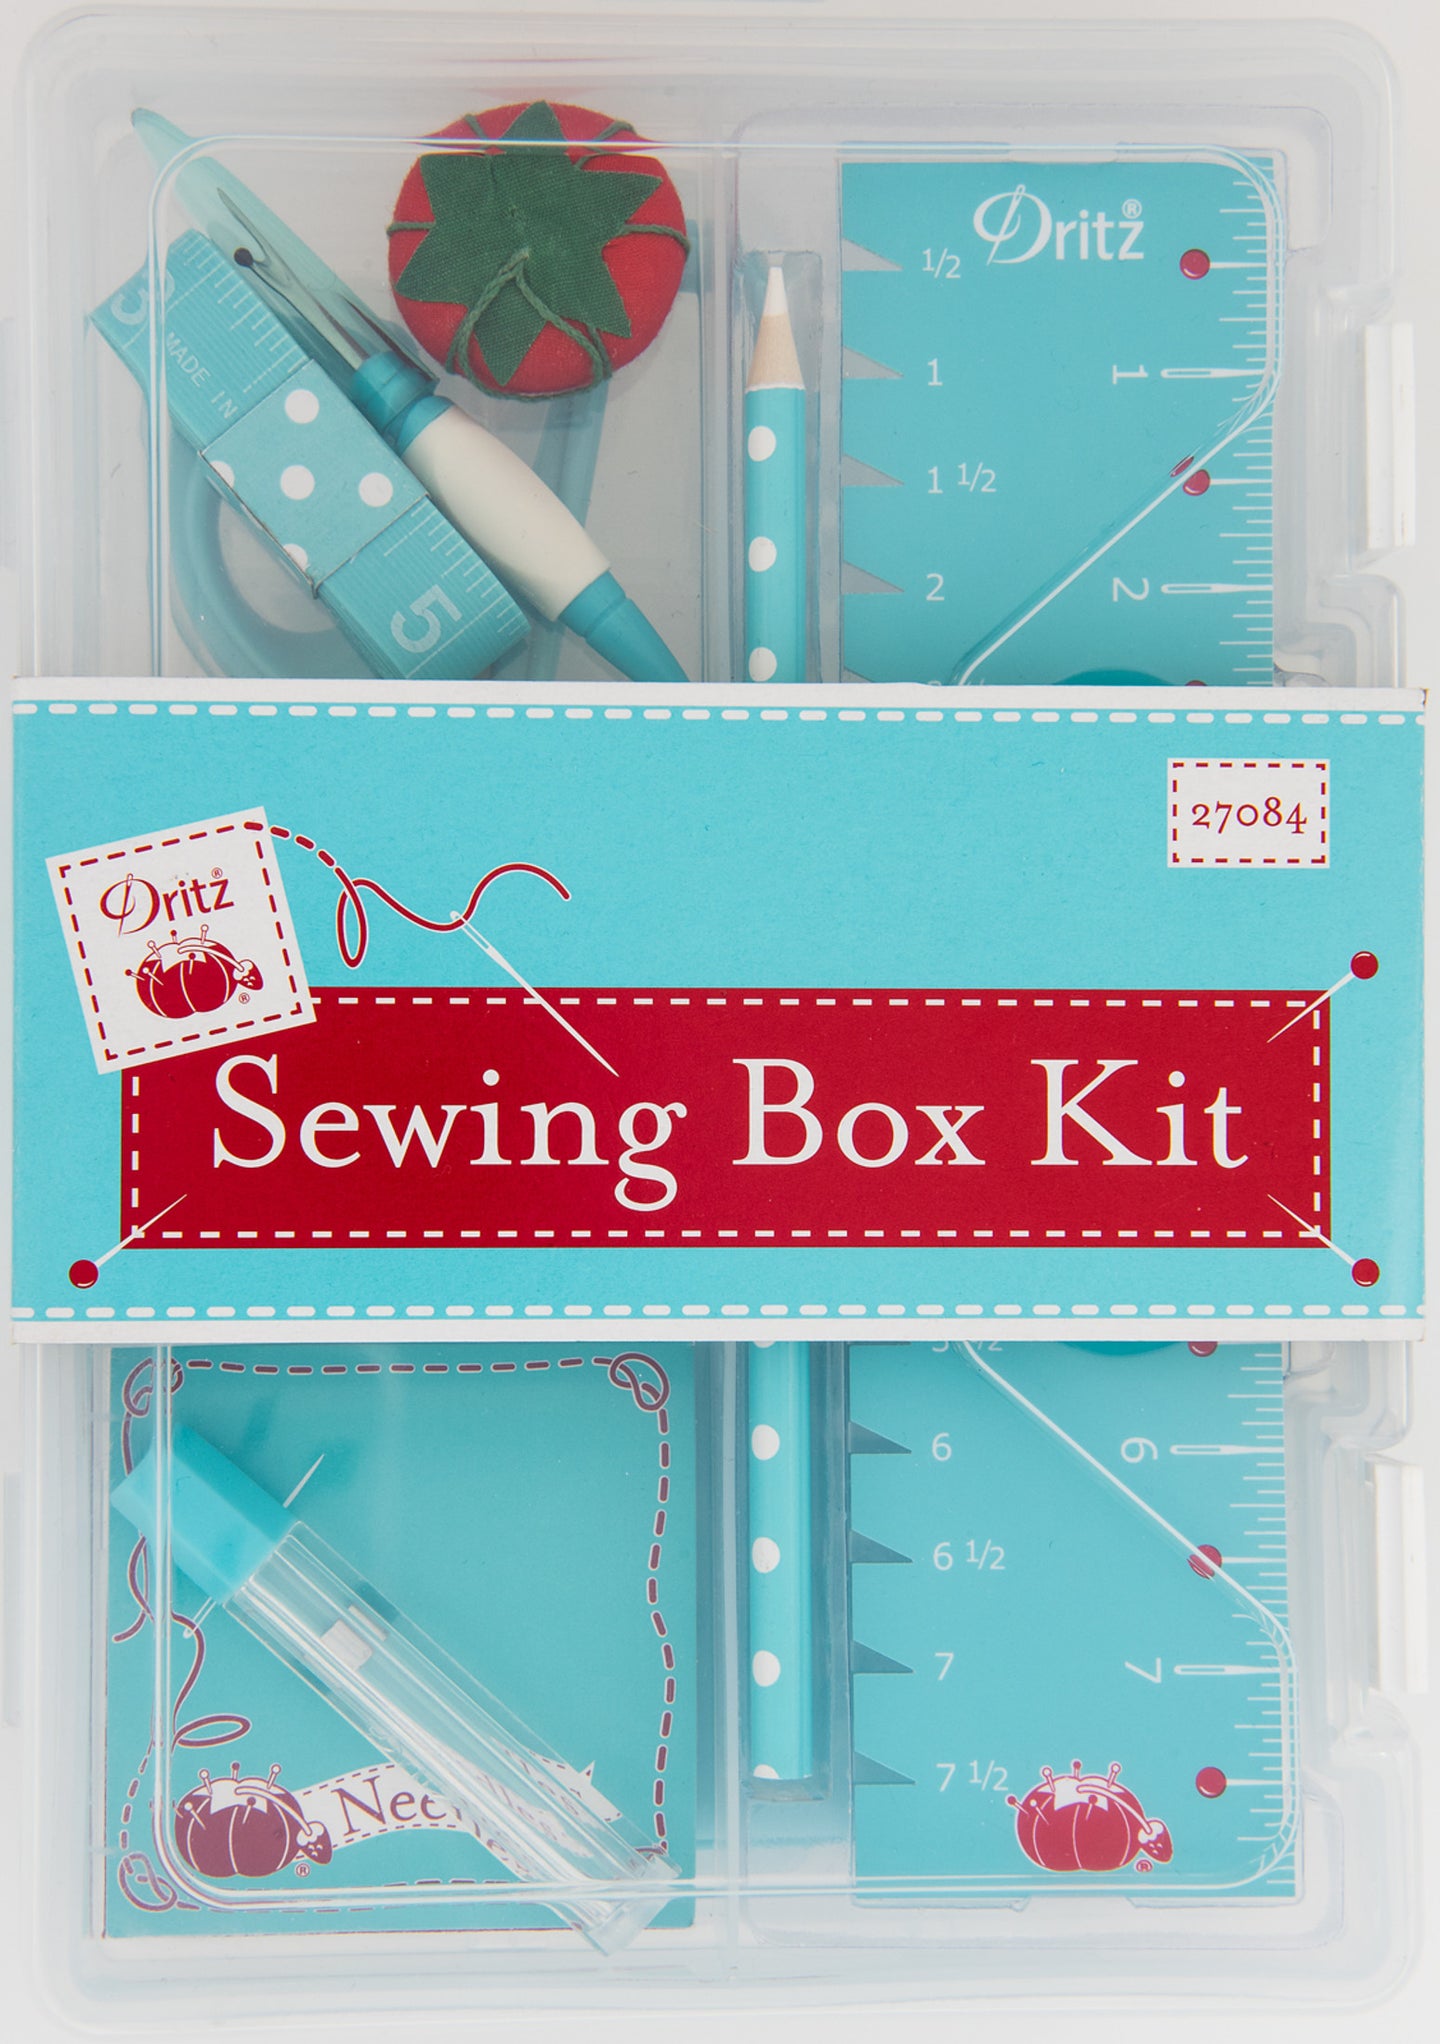 Basic Sewing Kit: The Essentials